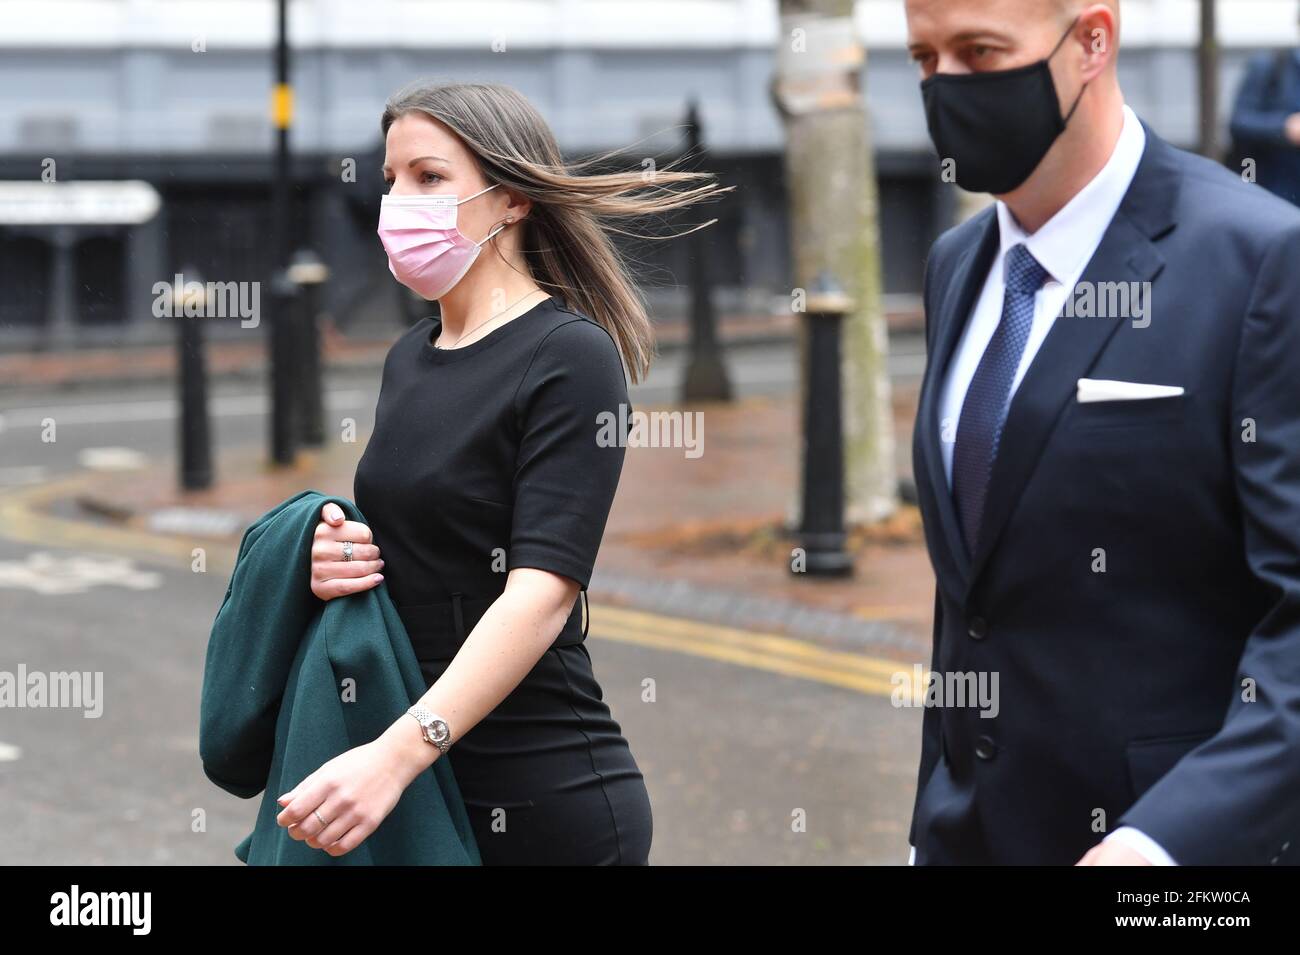 West Mercia Police Constables Benjamin Monk (right) and Mary Ellen  Bettley-Smith (left) arrive at Birmingham Crown Court to stand trial. Monk  is accused of the murder, and an alternative charge of manslaughter,